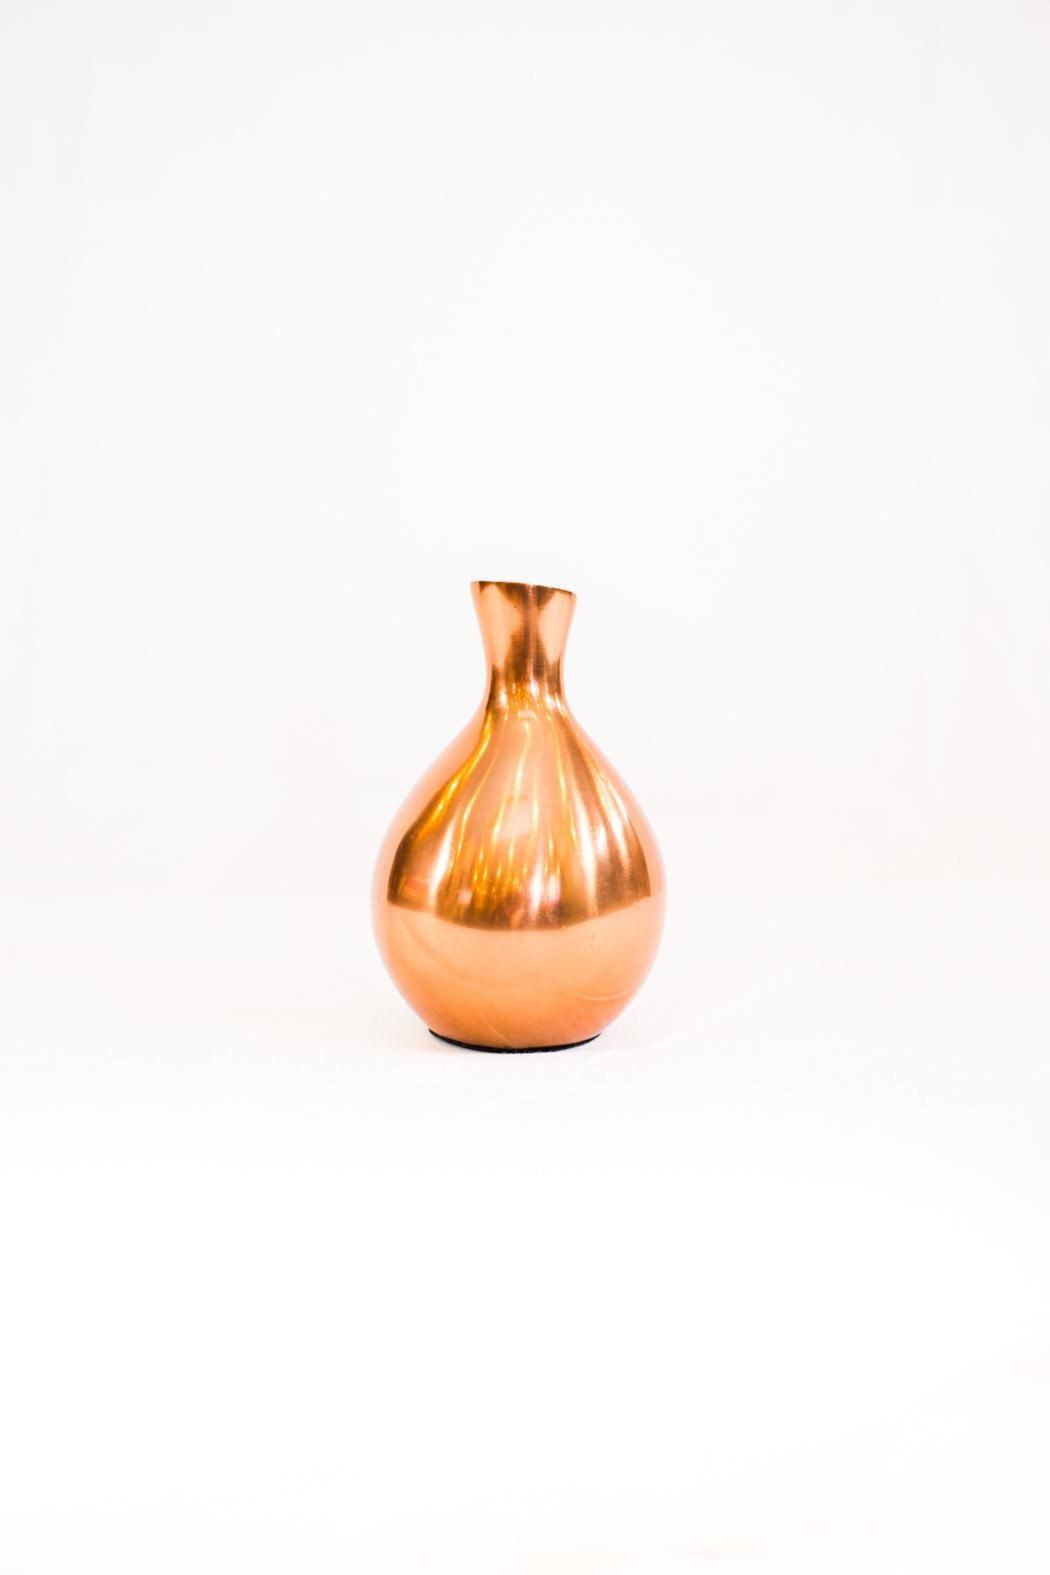 22 Great Global Views Vase 2024 free download global views vase of the toasted egg toastedegg pinterest profile statistics inside product global views small copper vase